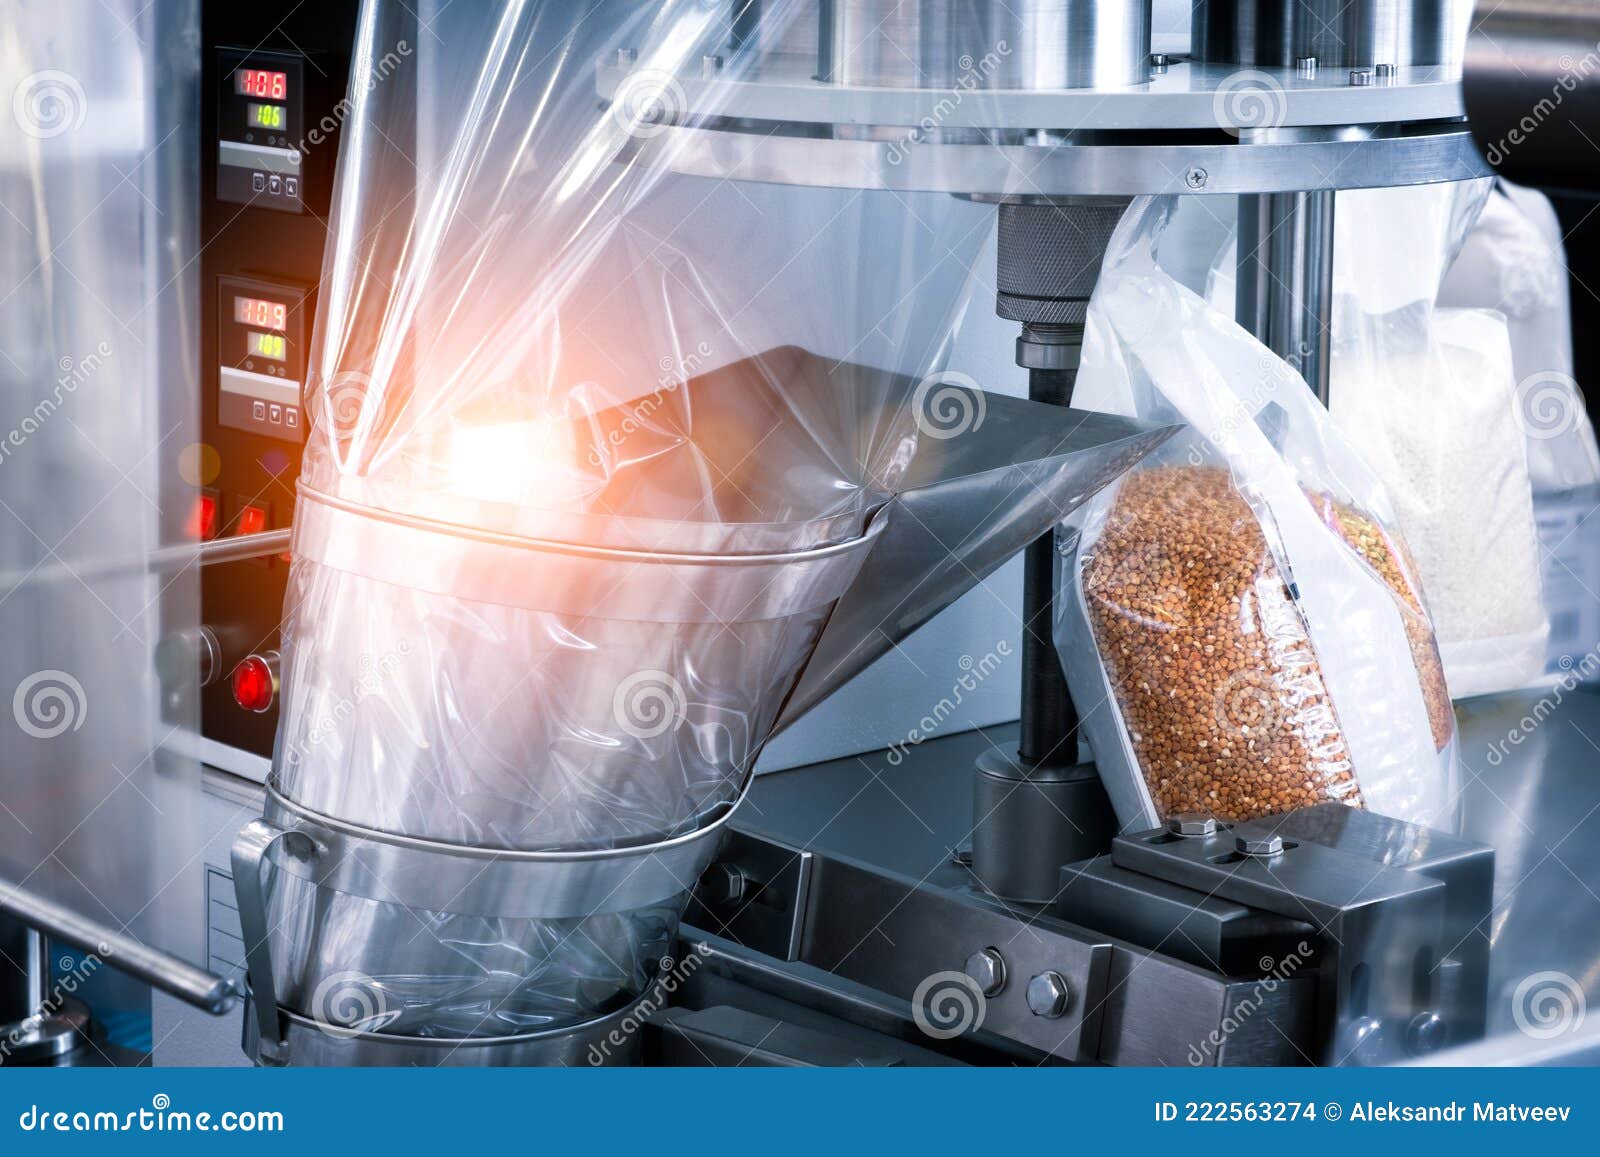 conveyor filling and packaging machine for food. product packaging concept, buckwheat groats